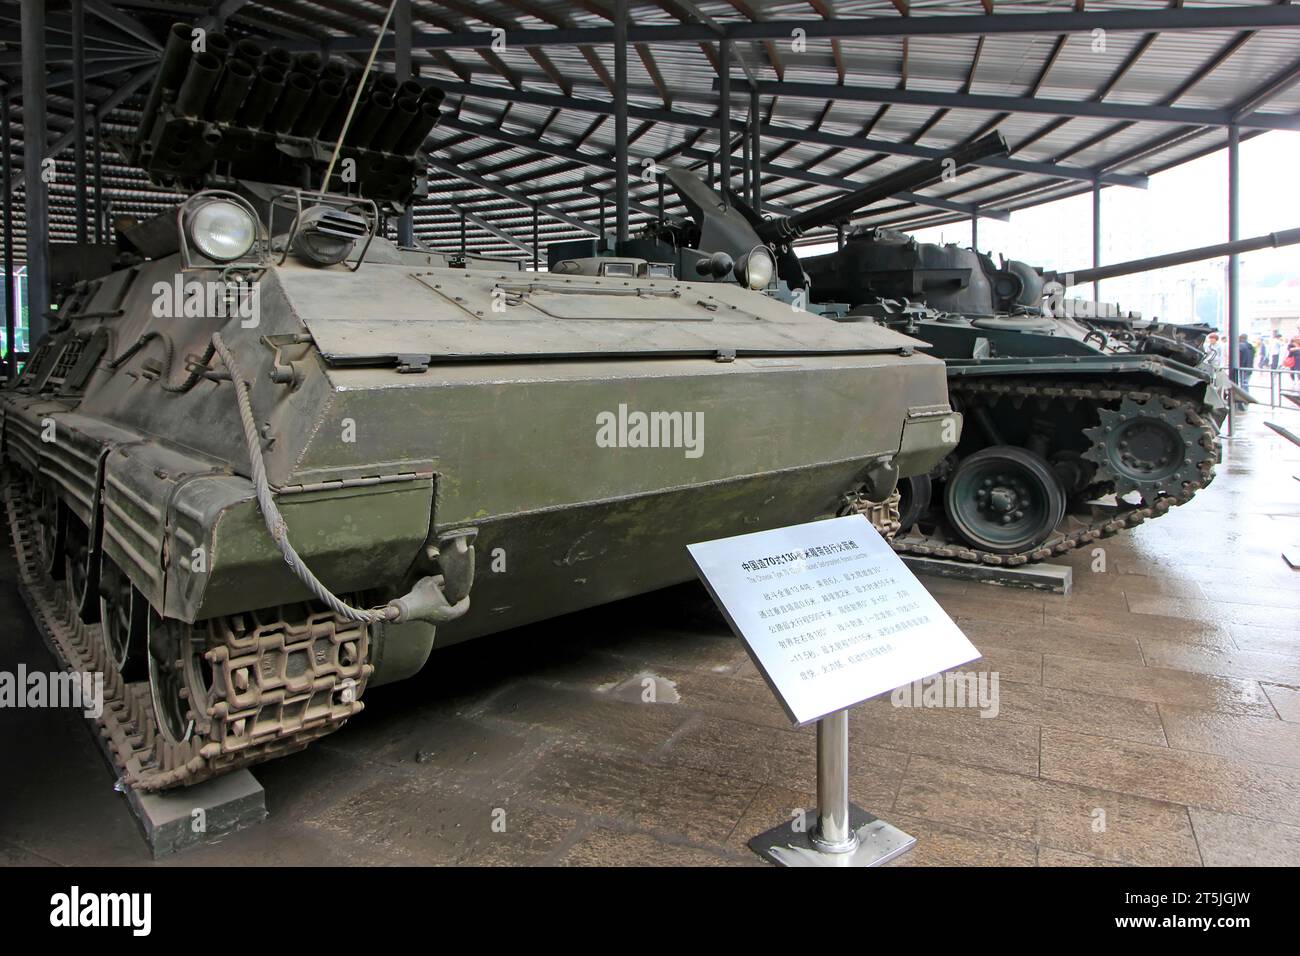 BEIJING - MAY 24: China made 70 type 70 mm caterpillar self-propelled rocket launcher, in the Chinese military museum, on may 24, 2014, Beijing, China Stock Photo